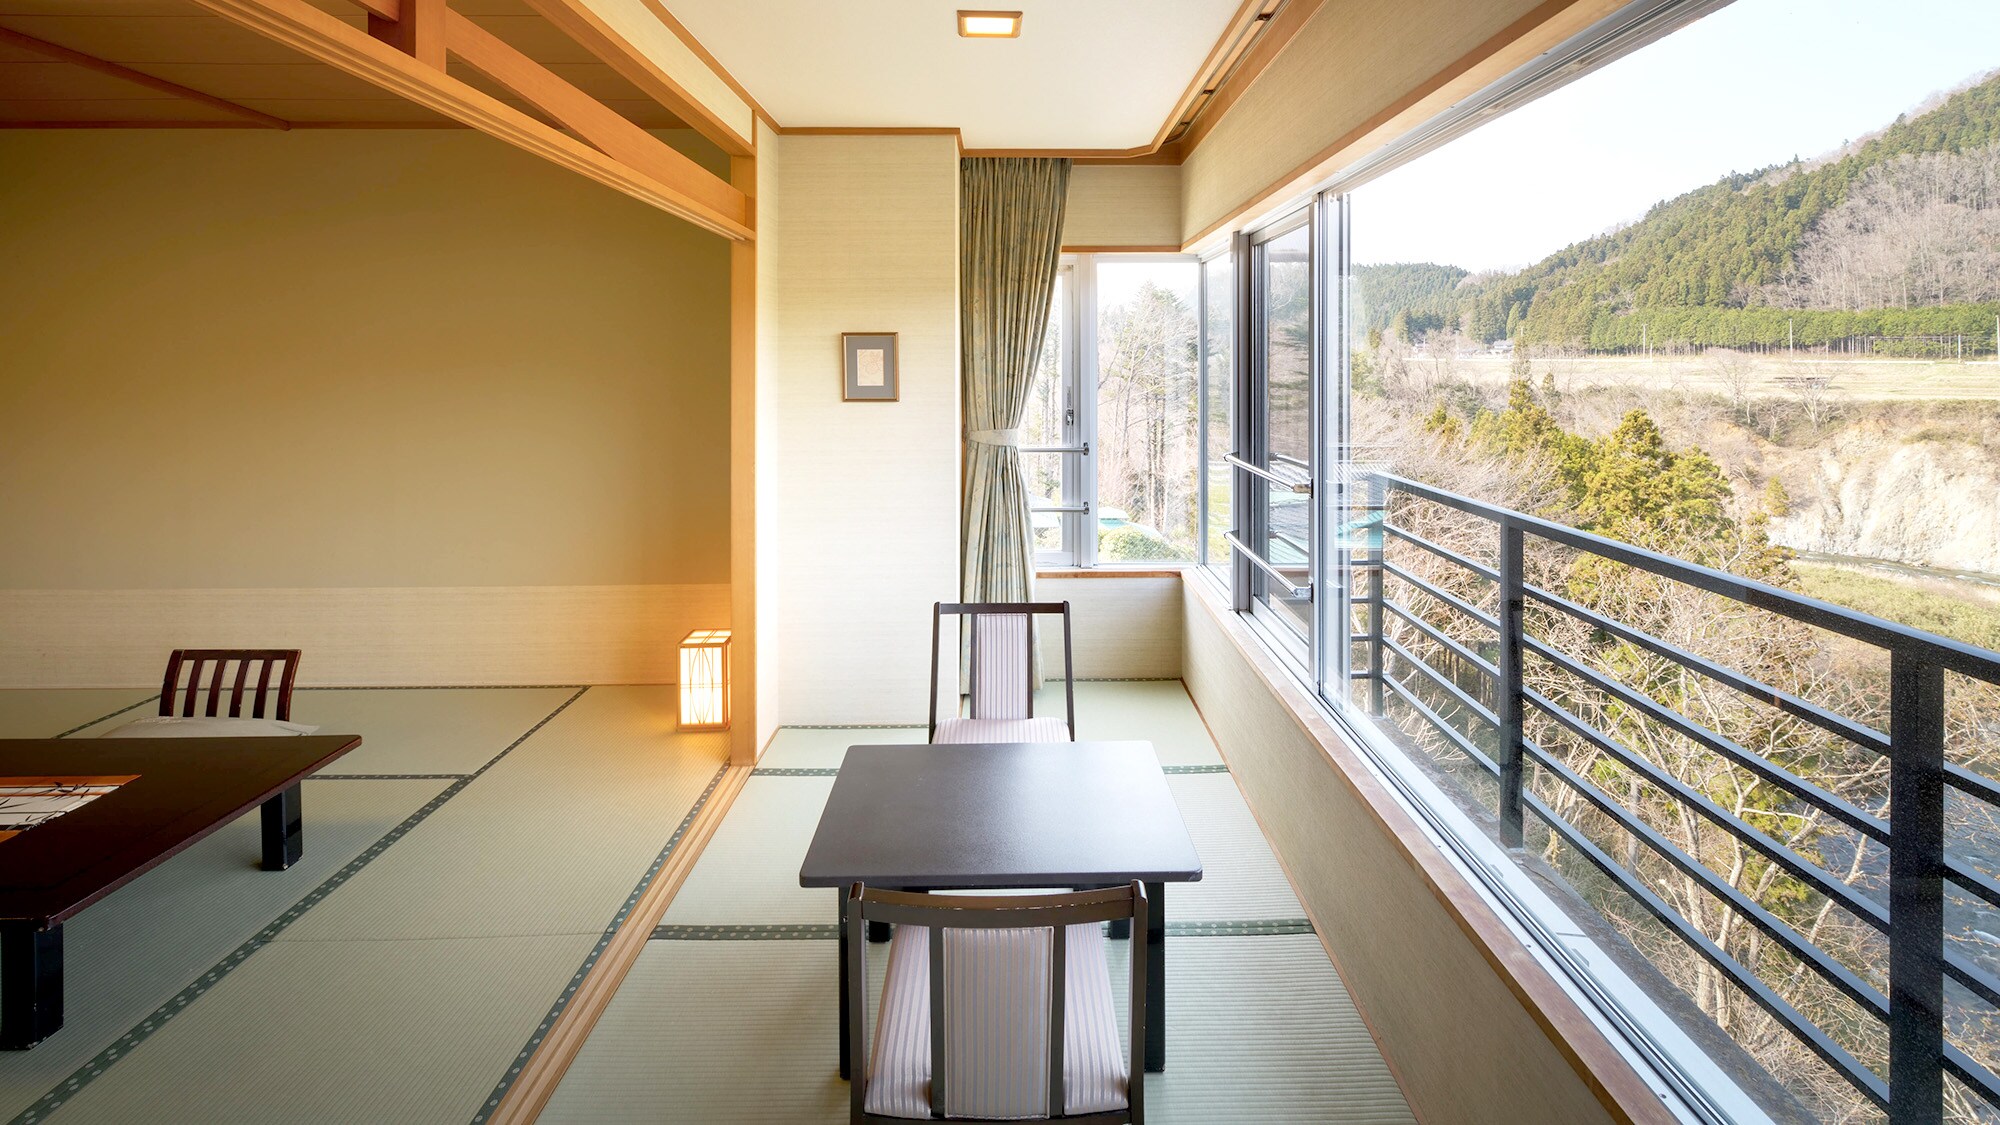 An example of a Japanese-style room [non-smoking]... All rooms face the river, and you can enjoy the seasonal nature of Akiu from the wide veranda.